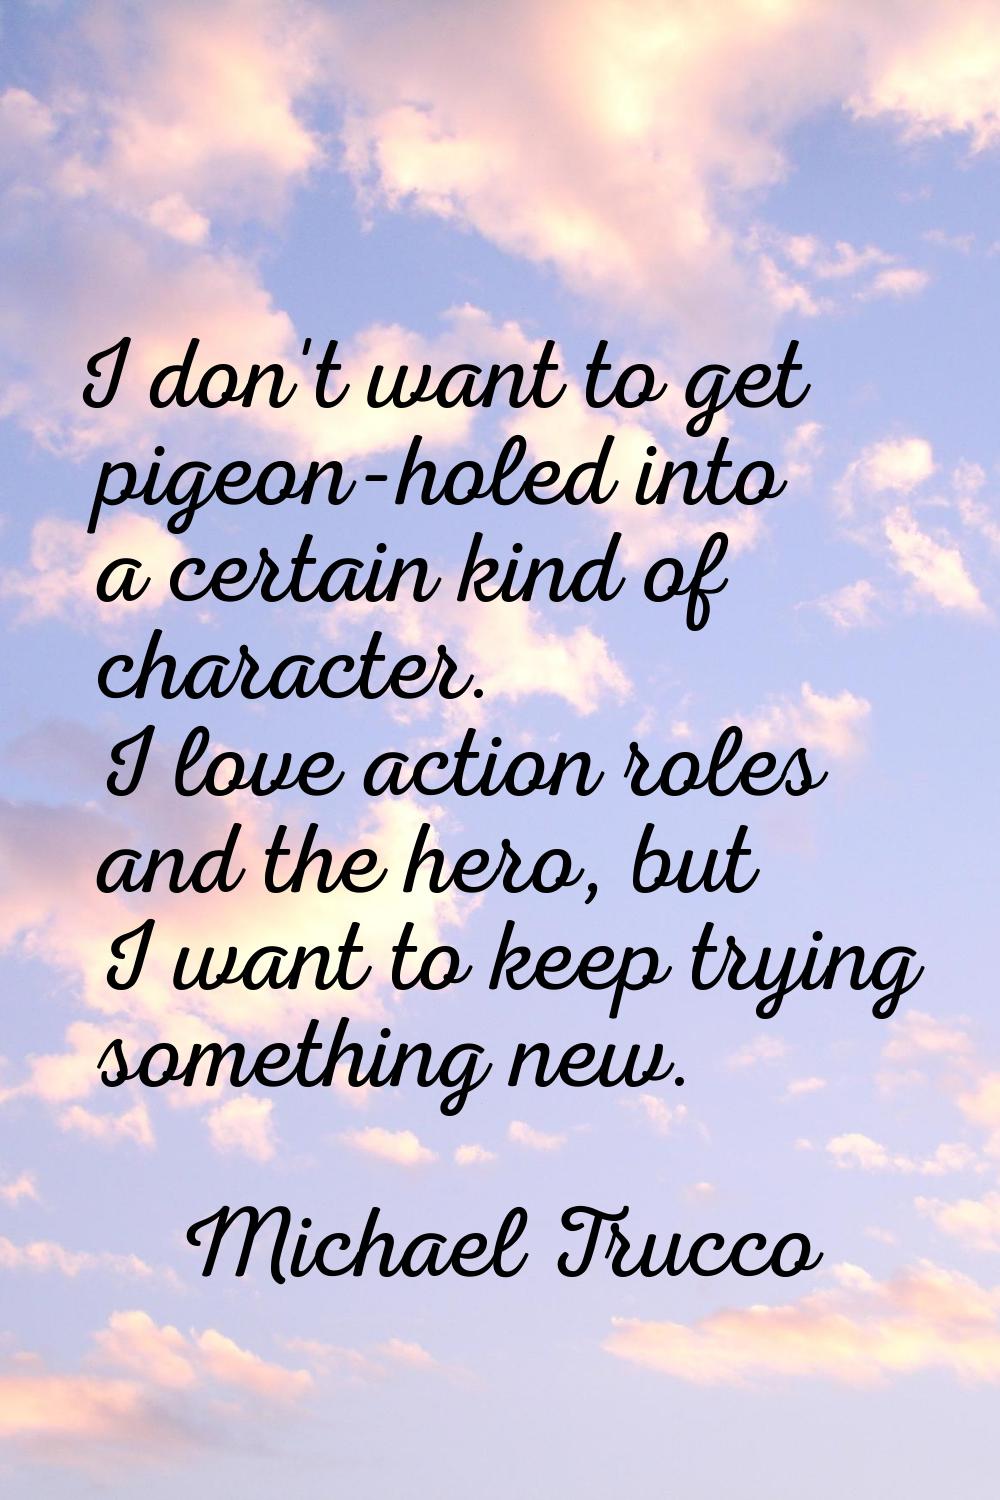 I don't want to get pigeon-holed into a certain kind of character. I love action roles and the hero